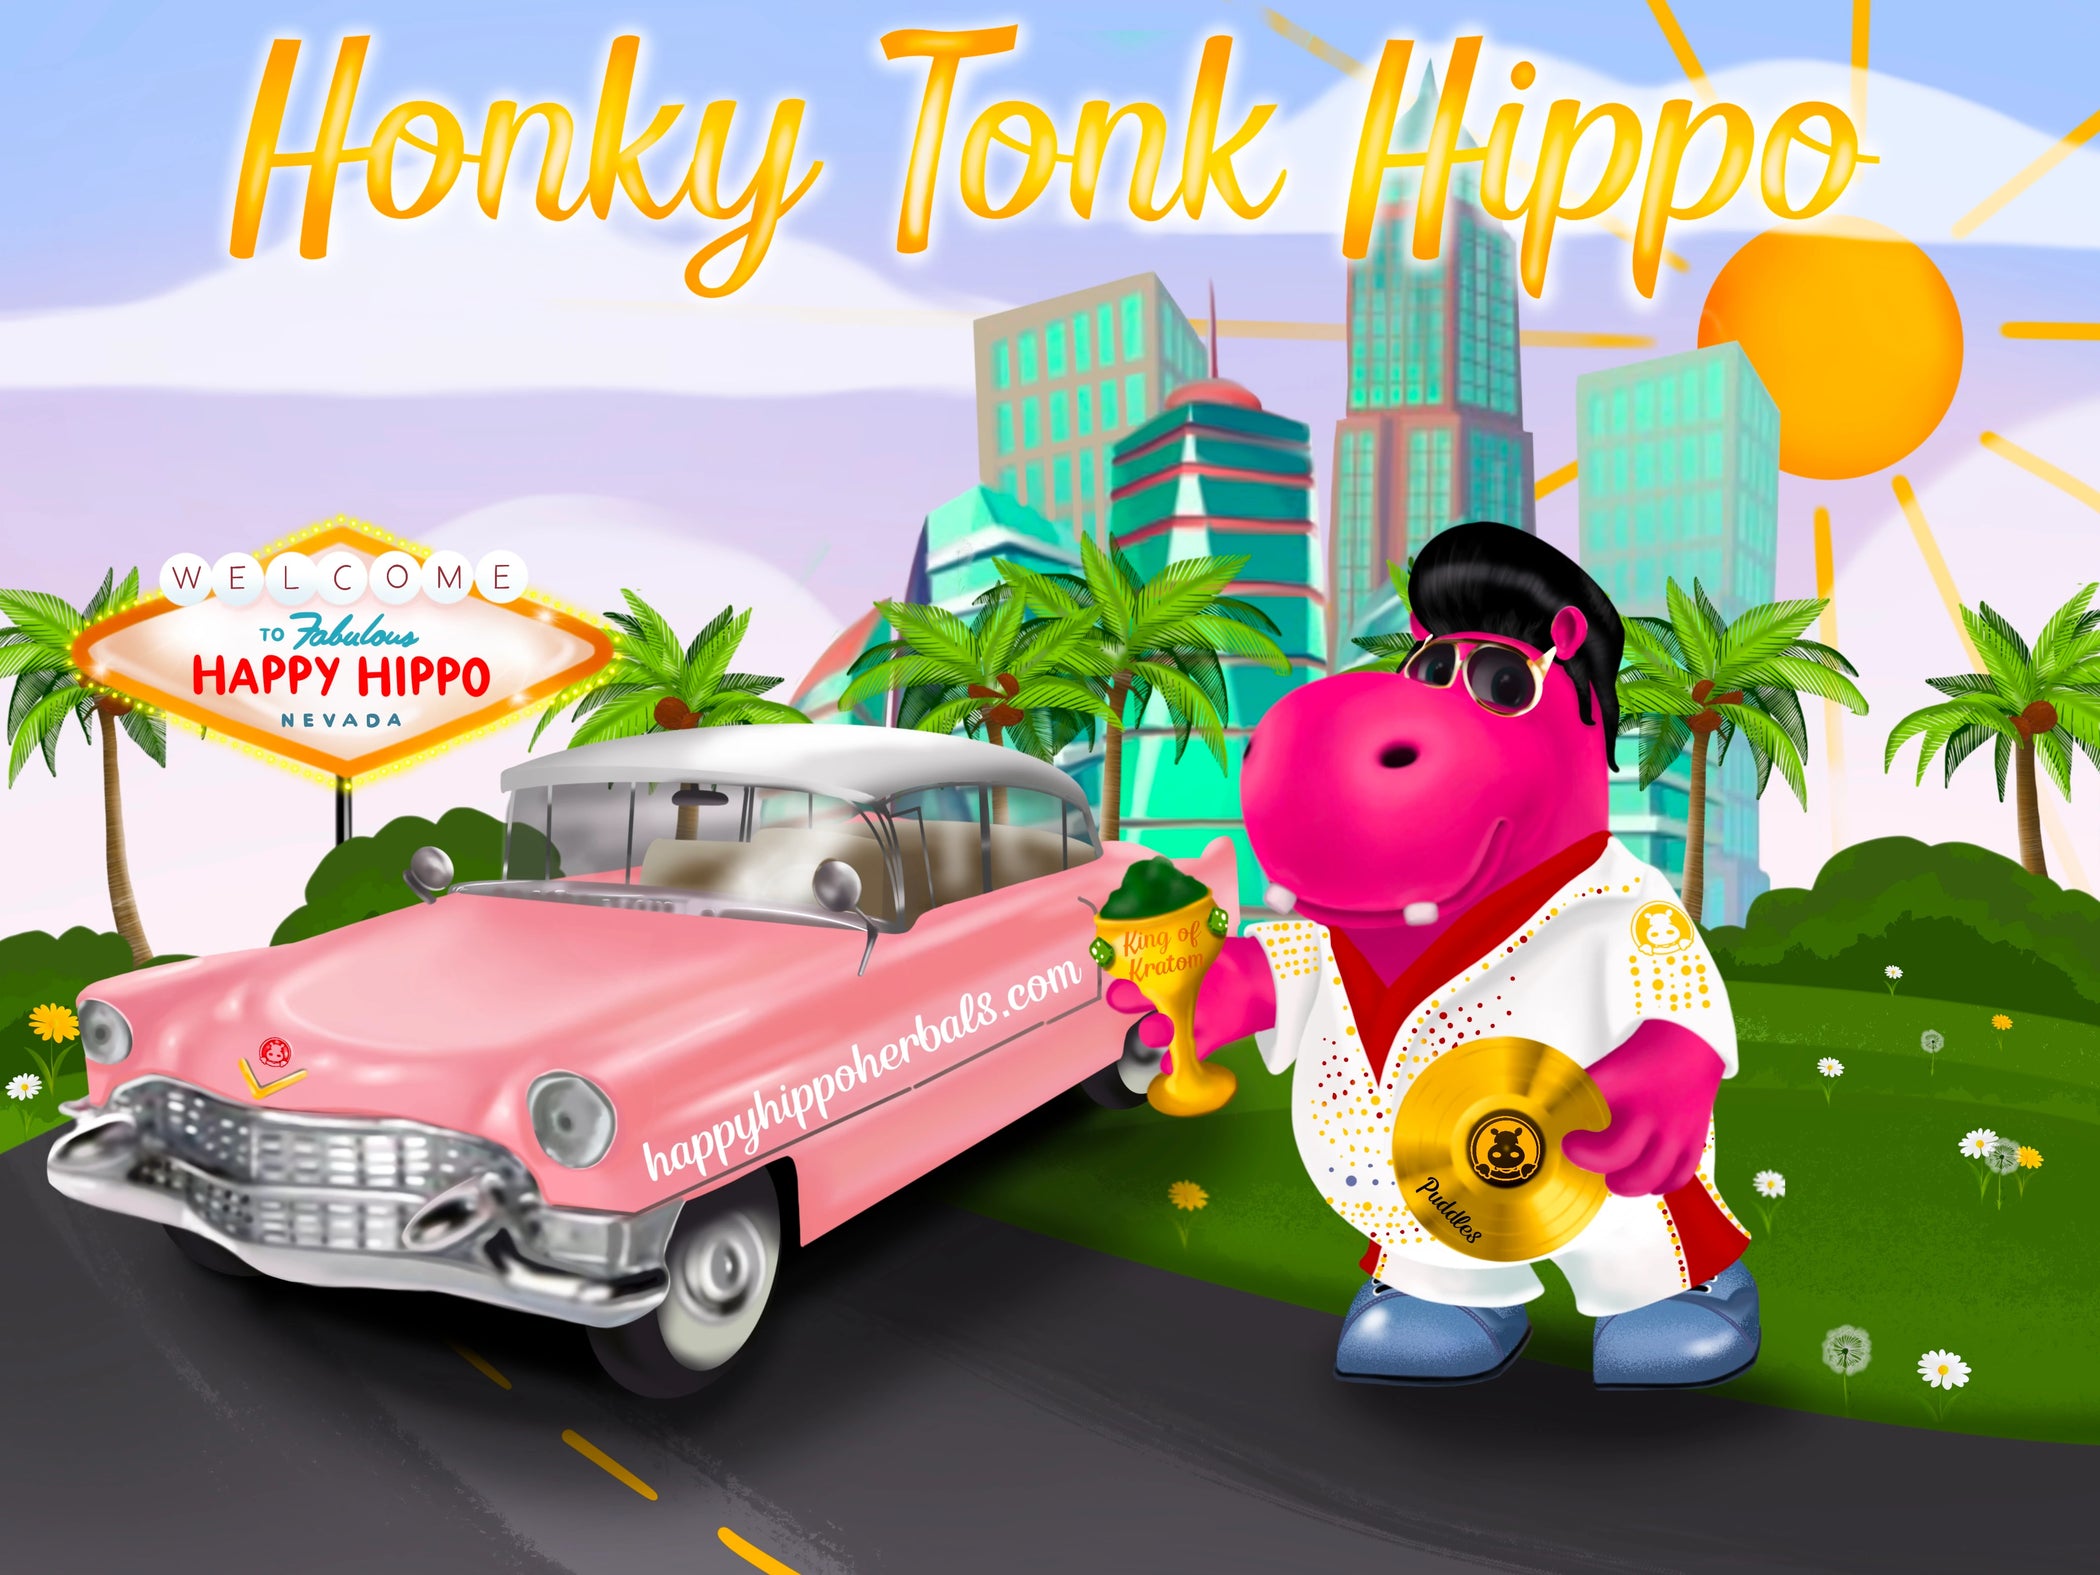 Graphic Designed image depicting Puddles the Hippo wearing a rhinstone jumpsuit, looking like Elvis and standing next to a pink cadillac. Puddles holds a gold record in one hand, and a cup of kratom powder in the other!